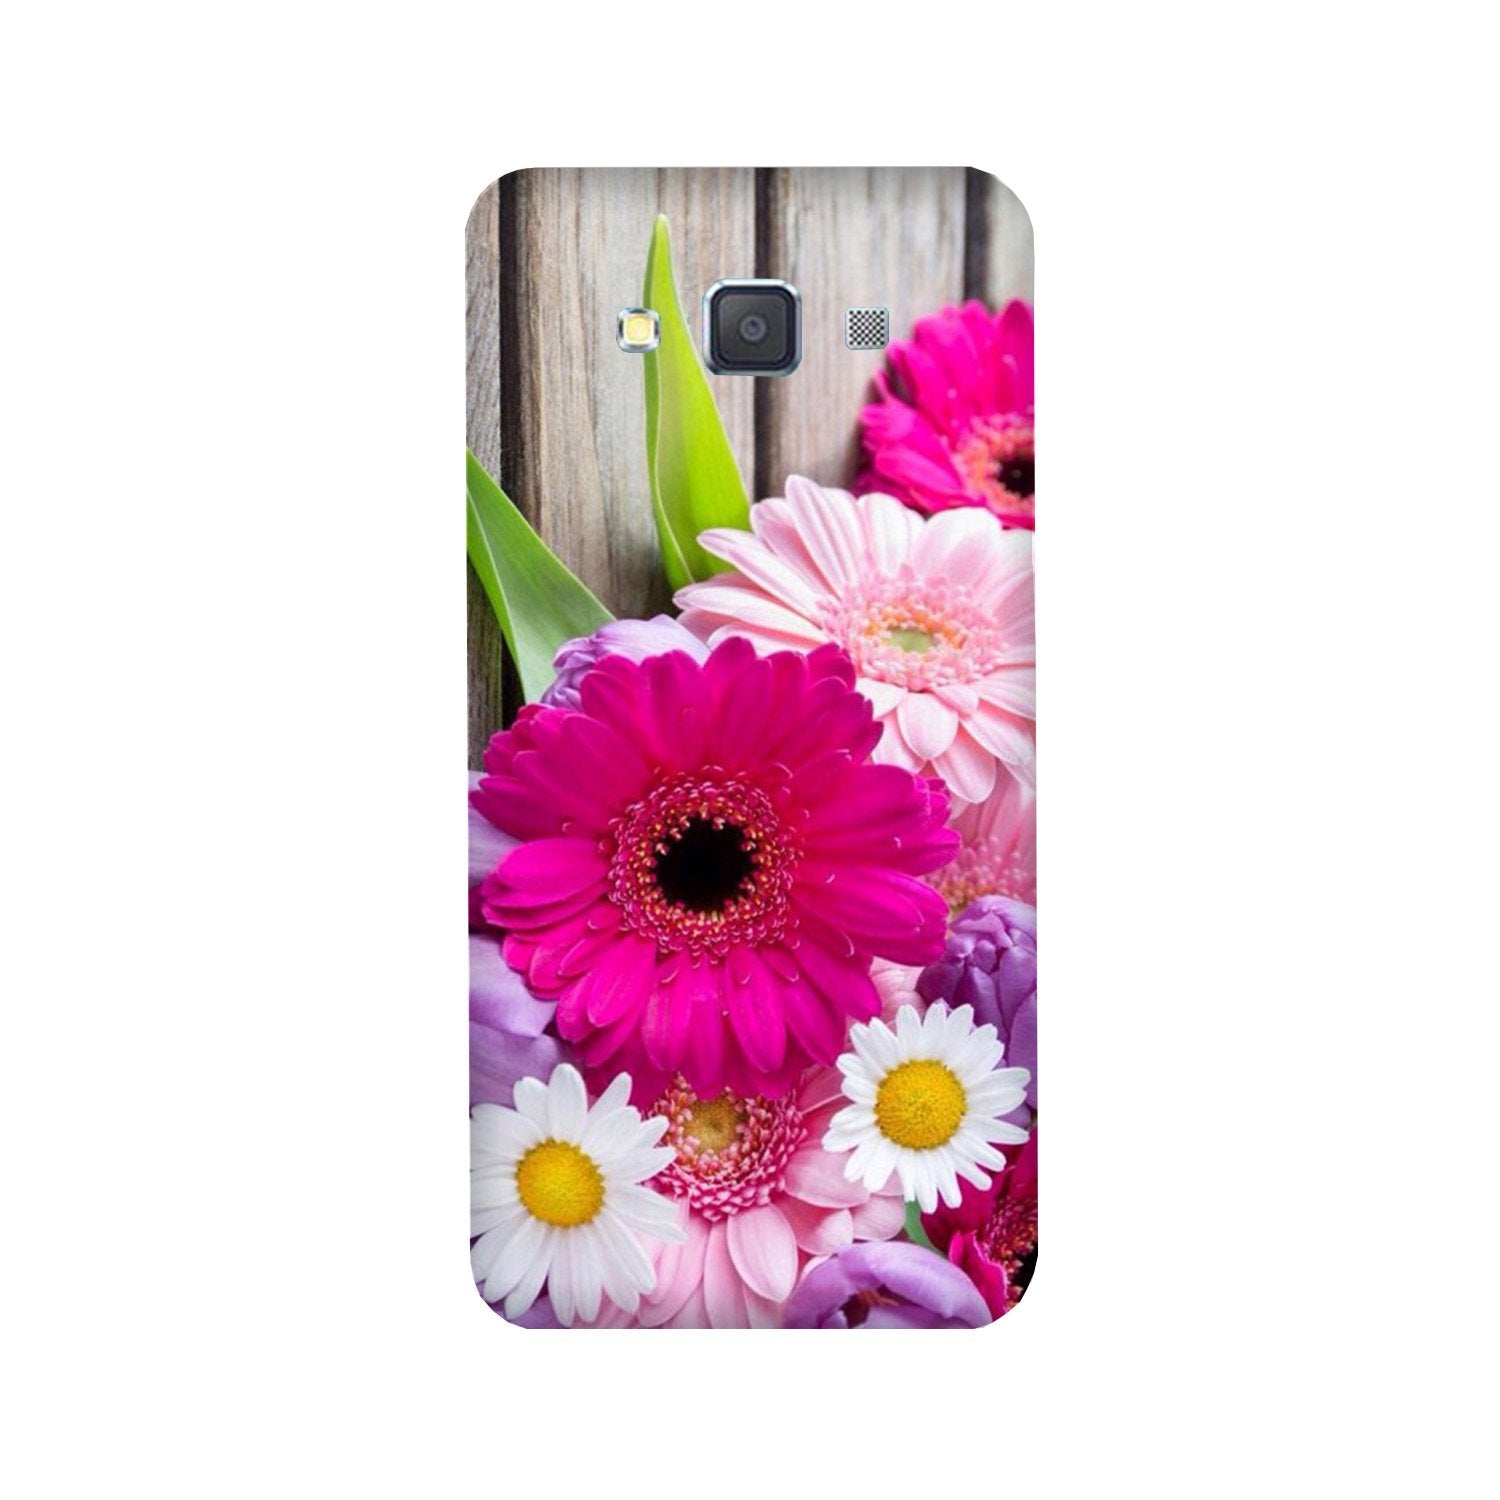 Coloful Daisy2 Case for Galaxy ON5/ON5 Pro